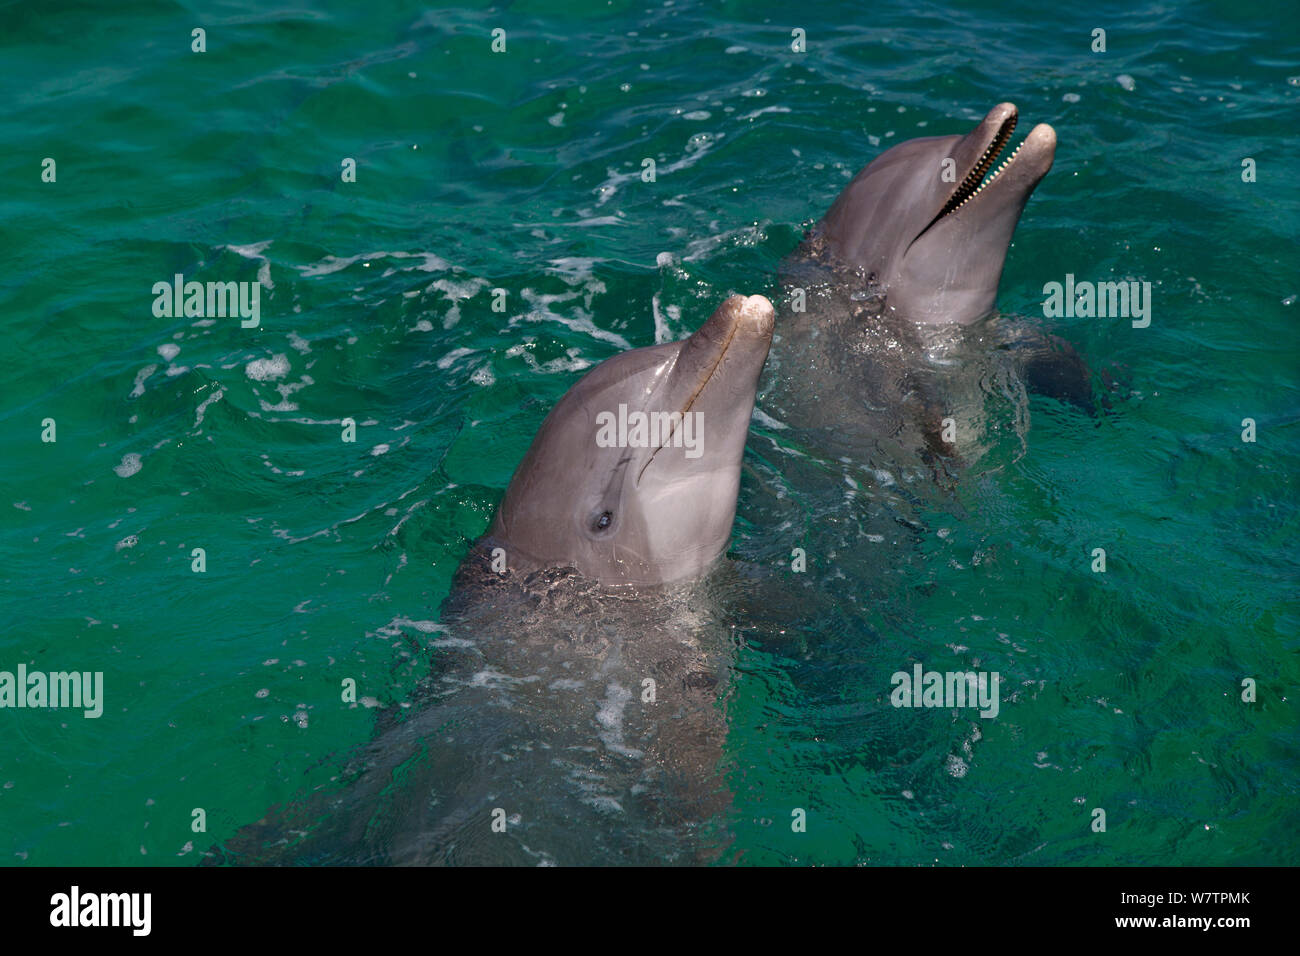 Two Bottle-nosed dolphins (Tursiops truncatus) looking out of water, Marine Institute, Bay Islands, Honduras, Caribbean, February. Stock Photo